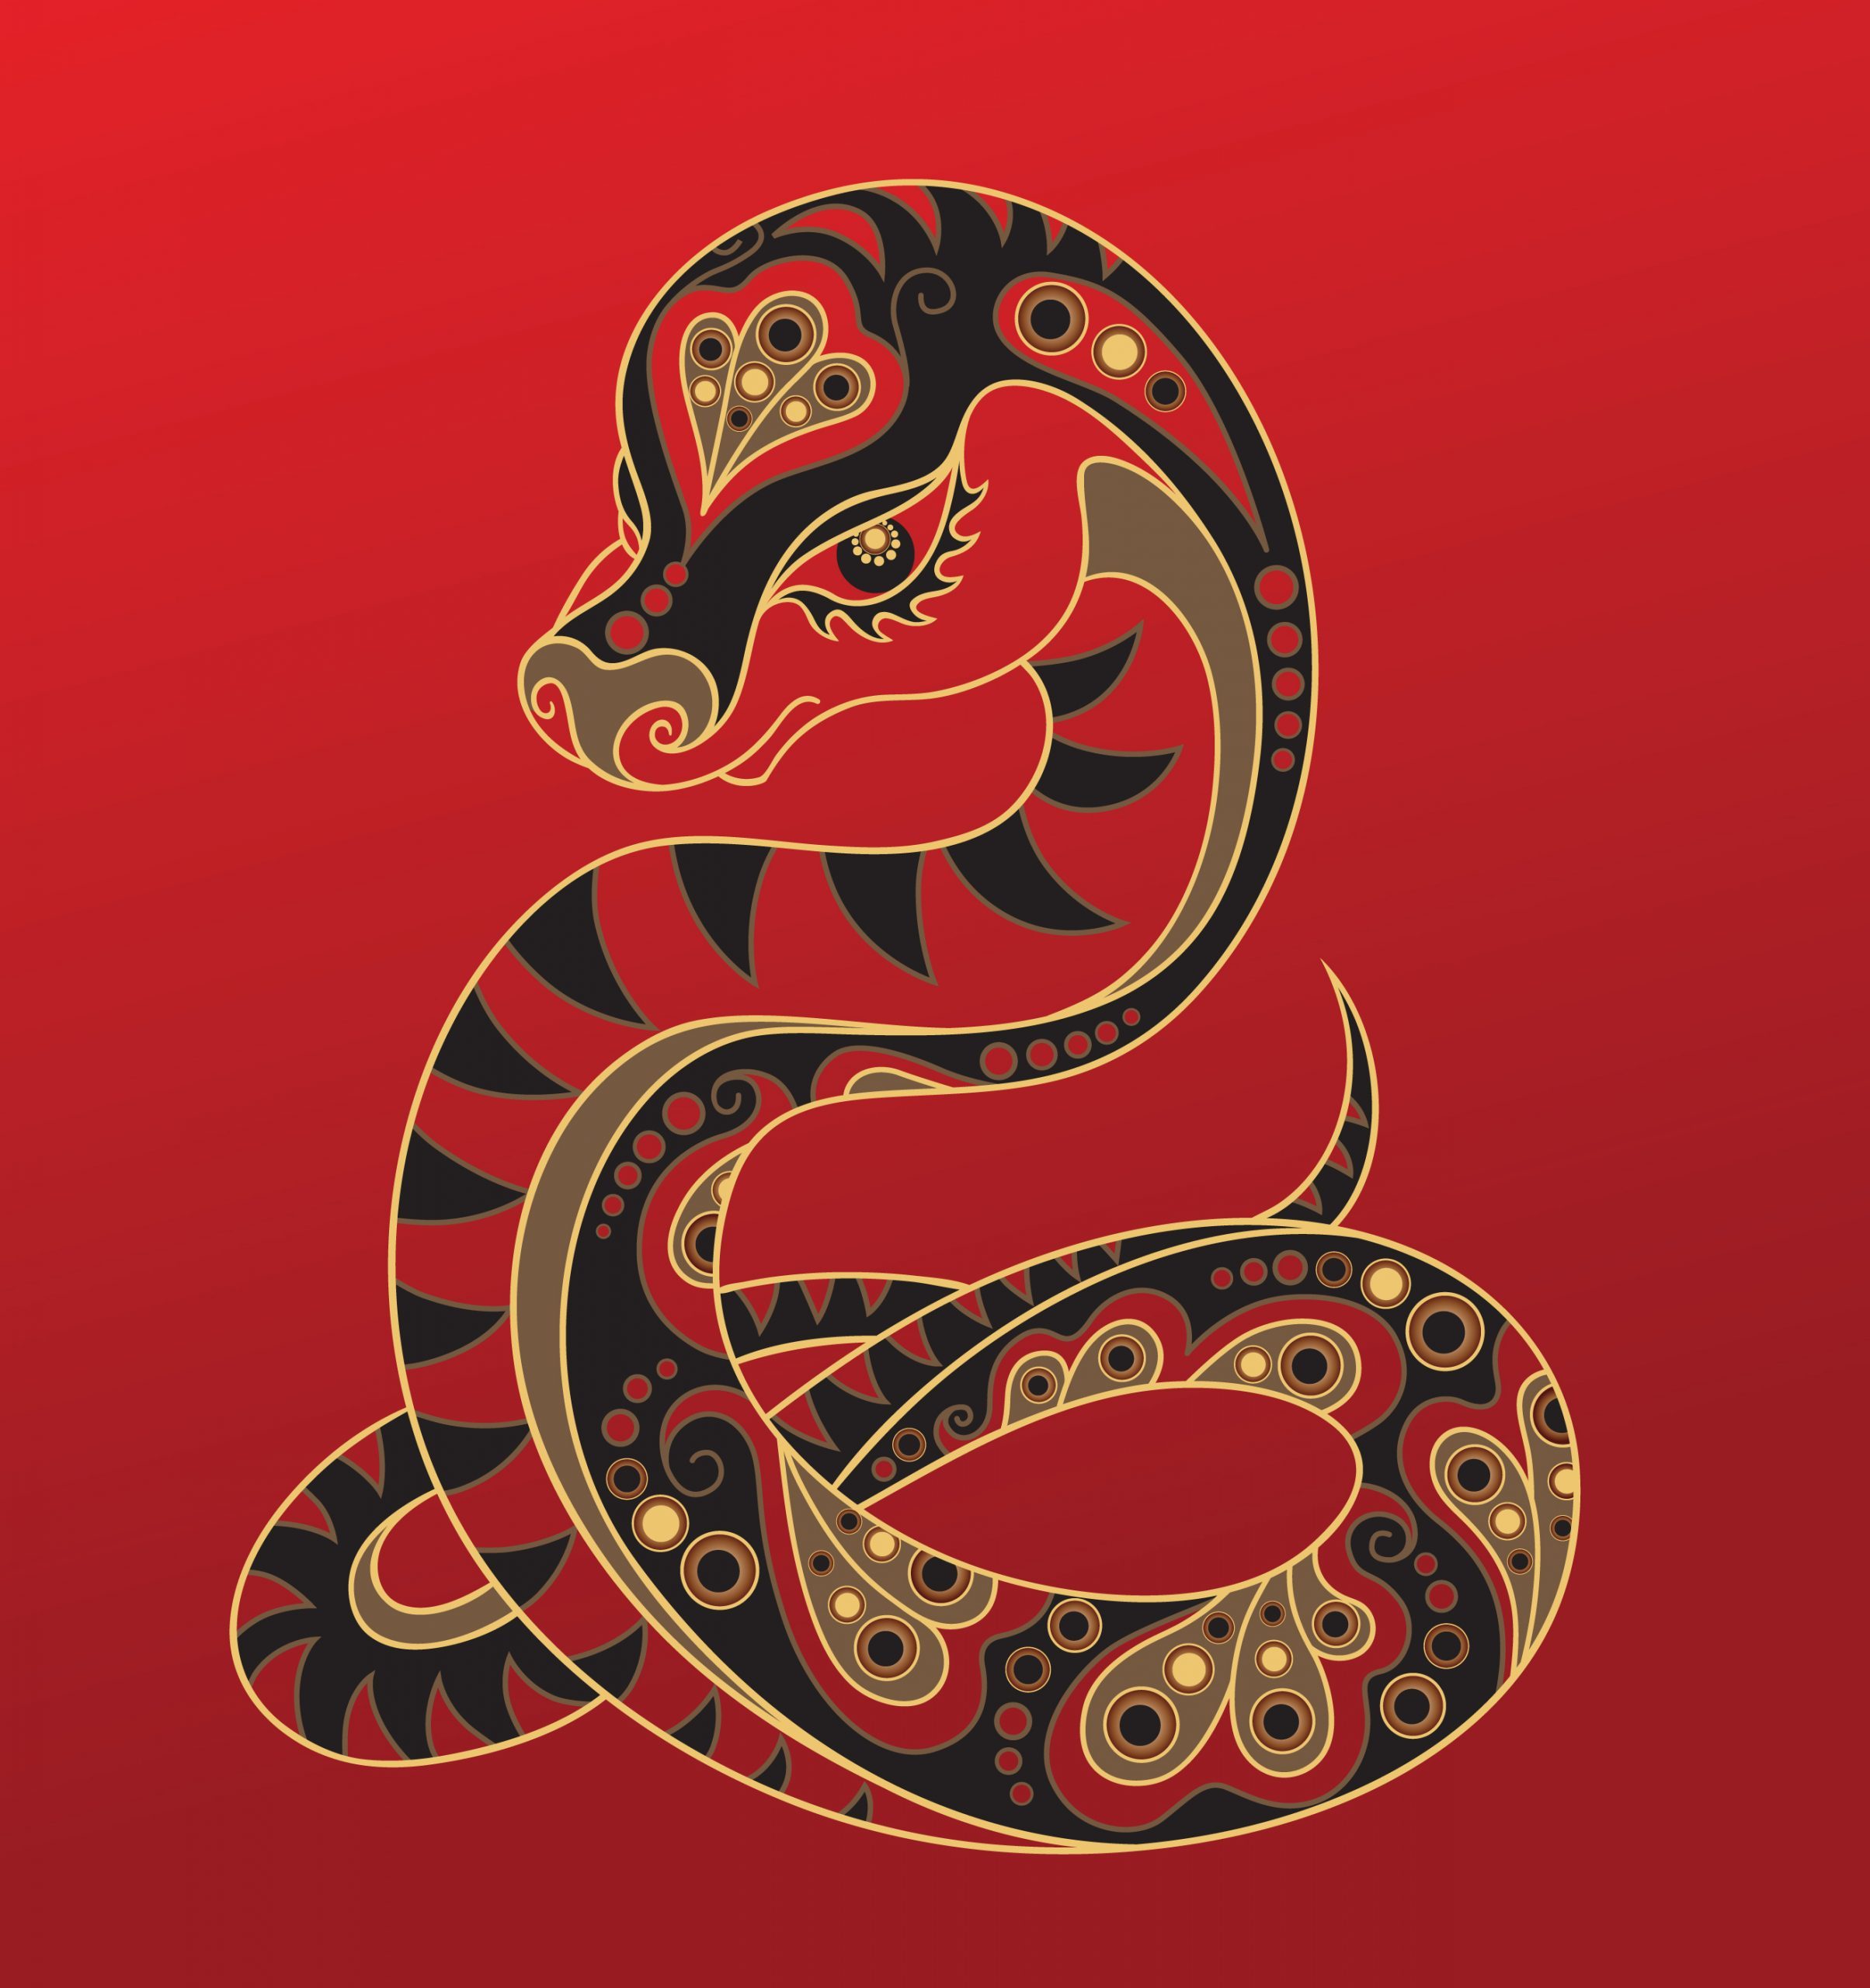 What's in Store for You Based on Your Chinese Zodiac Reader's Digest